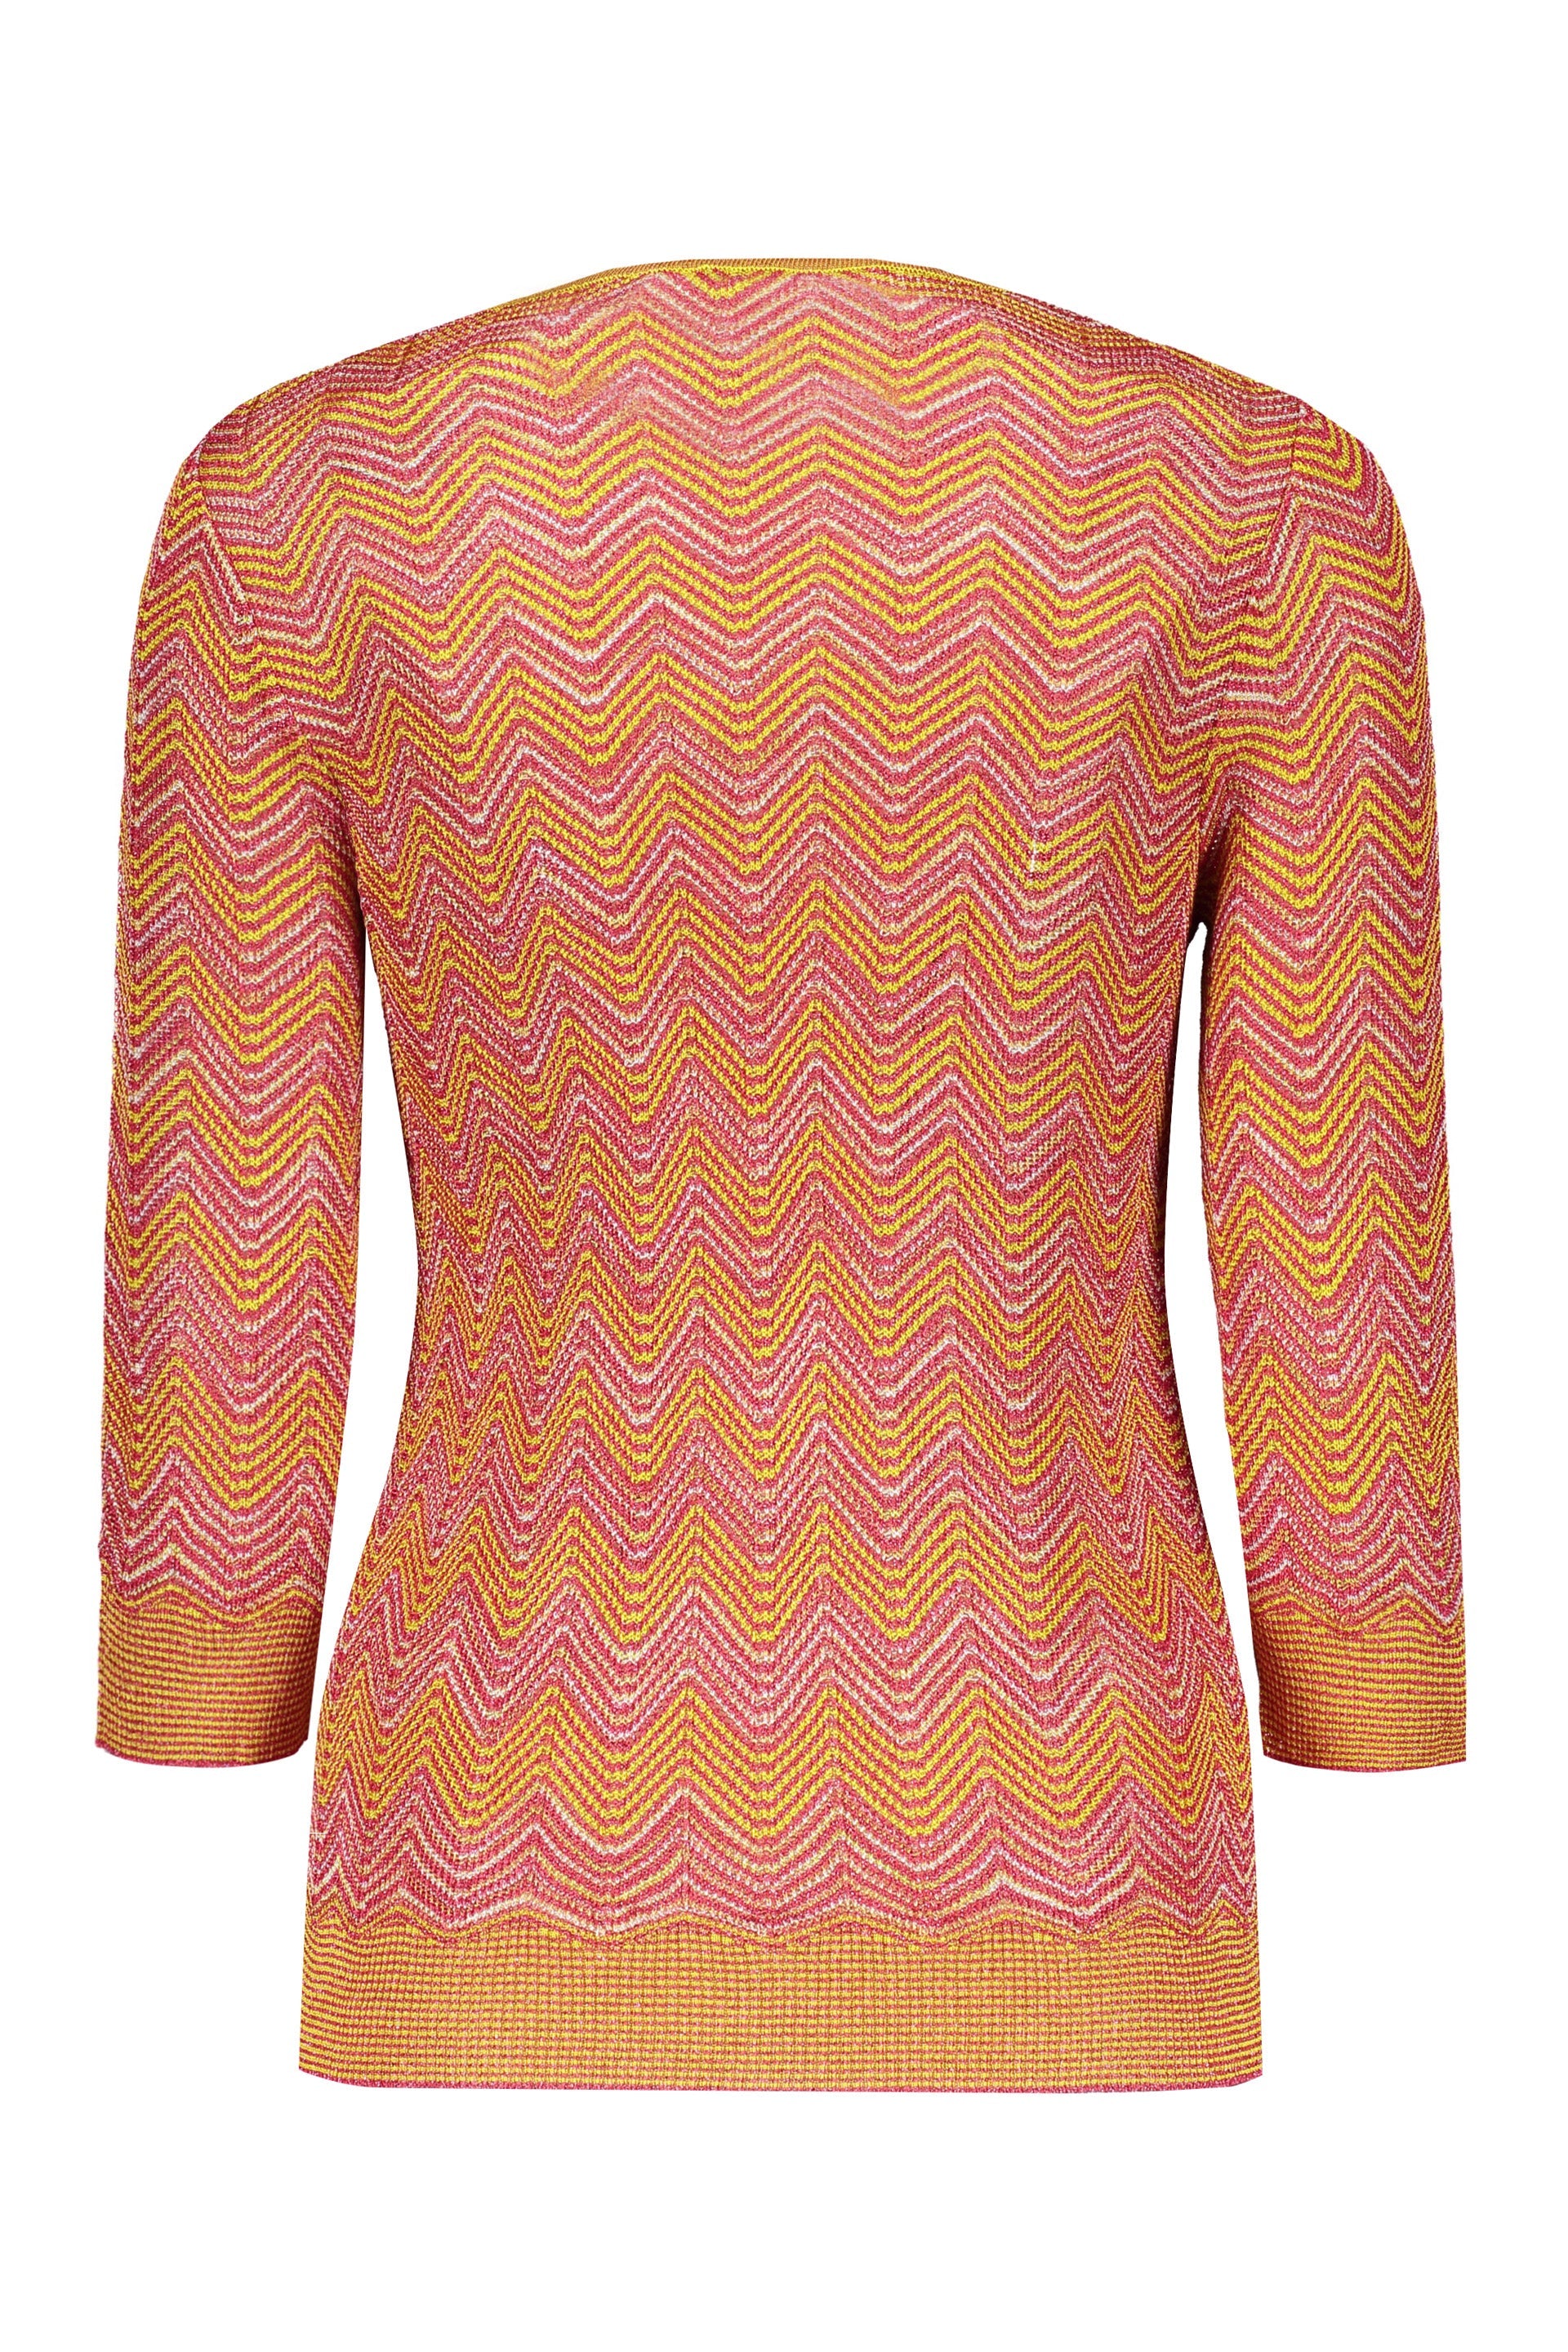 Missoni-OUTLET-SALE-Knitted-top-Shirts-ARCHIVE-COLLECTION-2_50844a92-8eae-49c5-9272-70a5517fb4ef.jpg